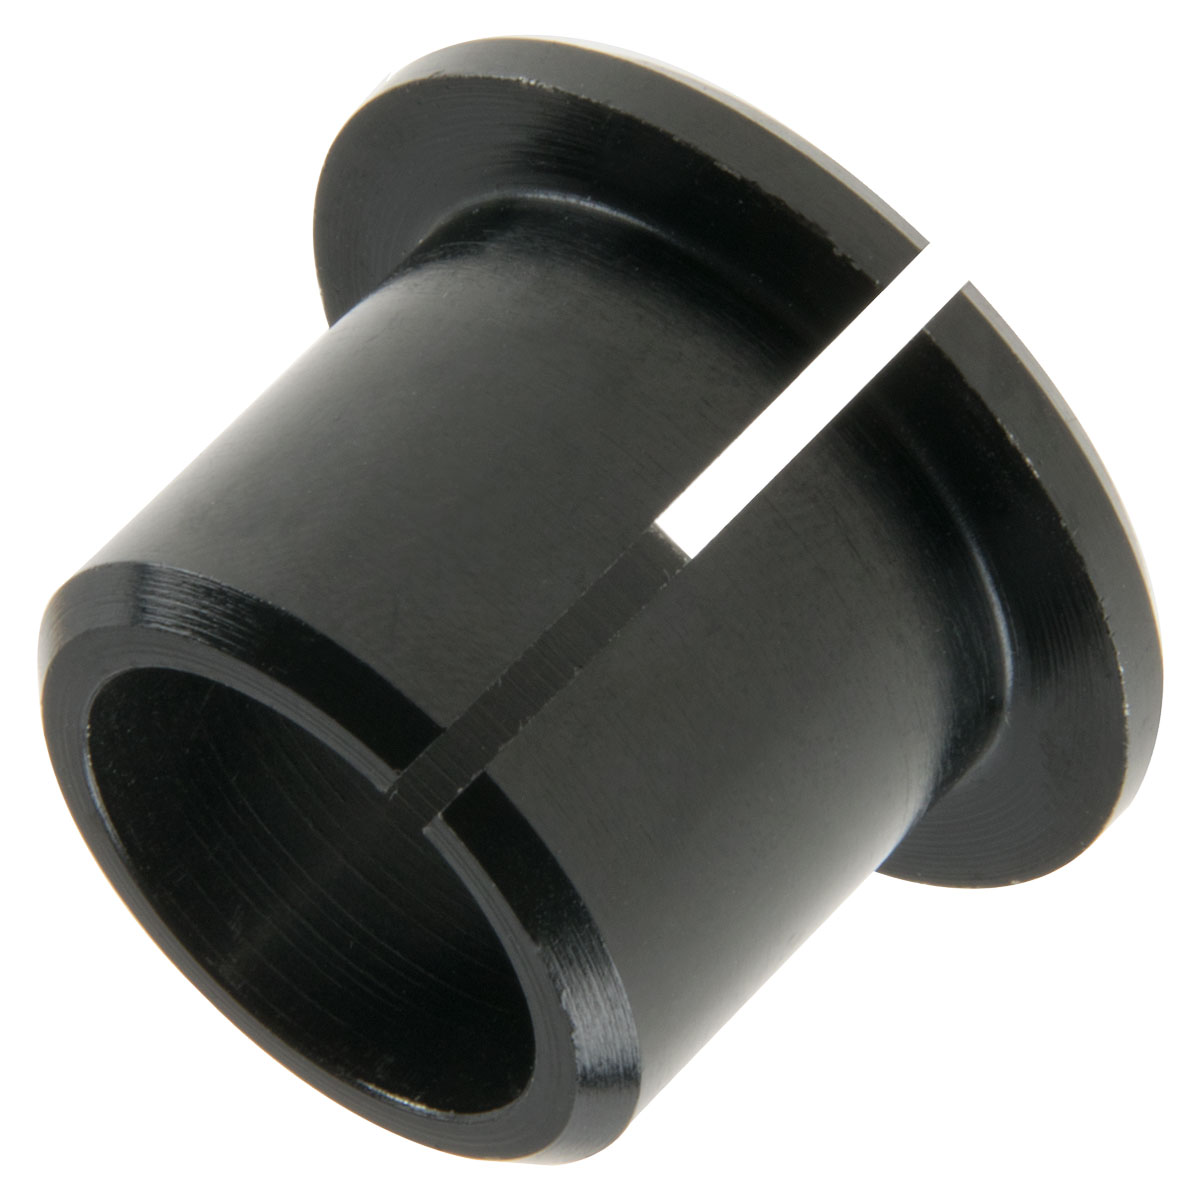 Synergy Manufacturing TRE Adapter for 7/8" Hole